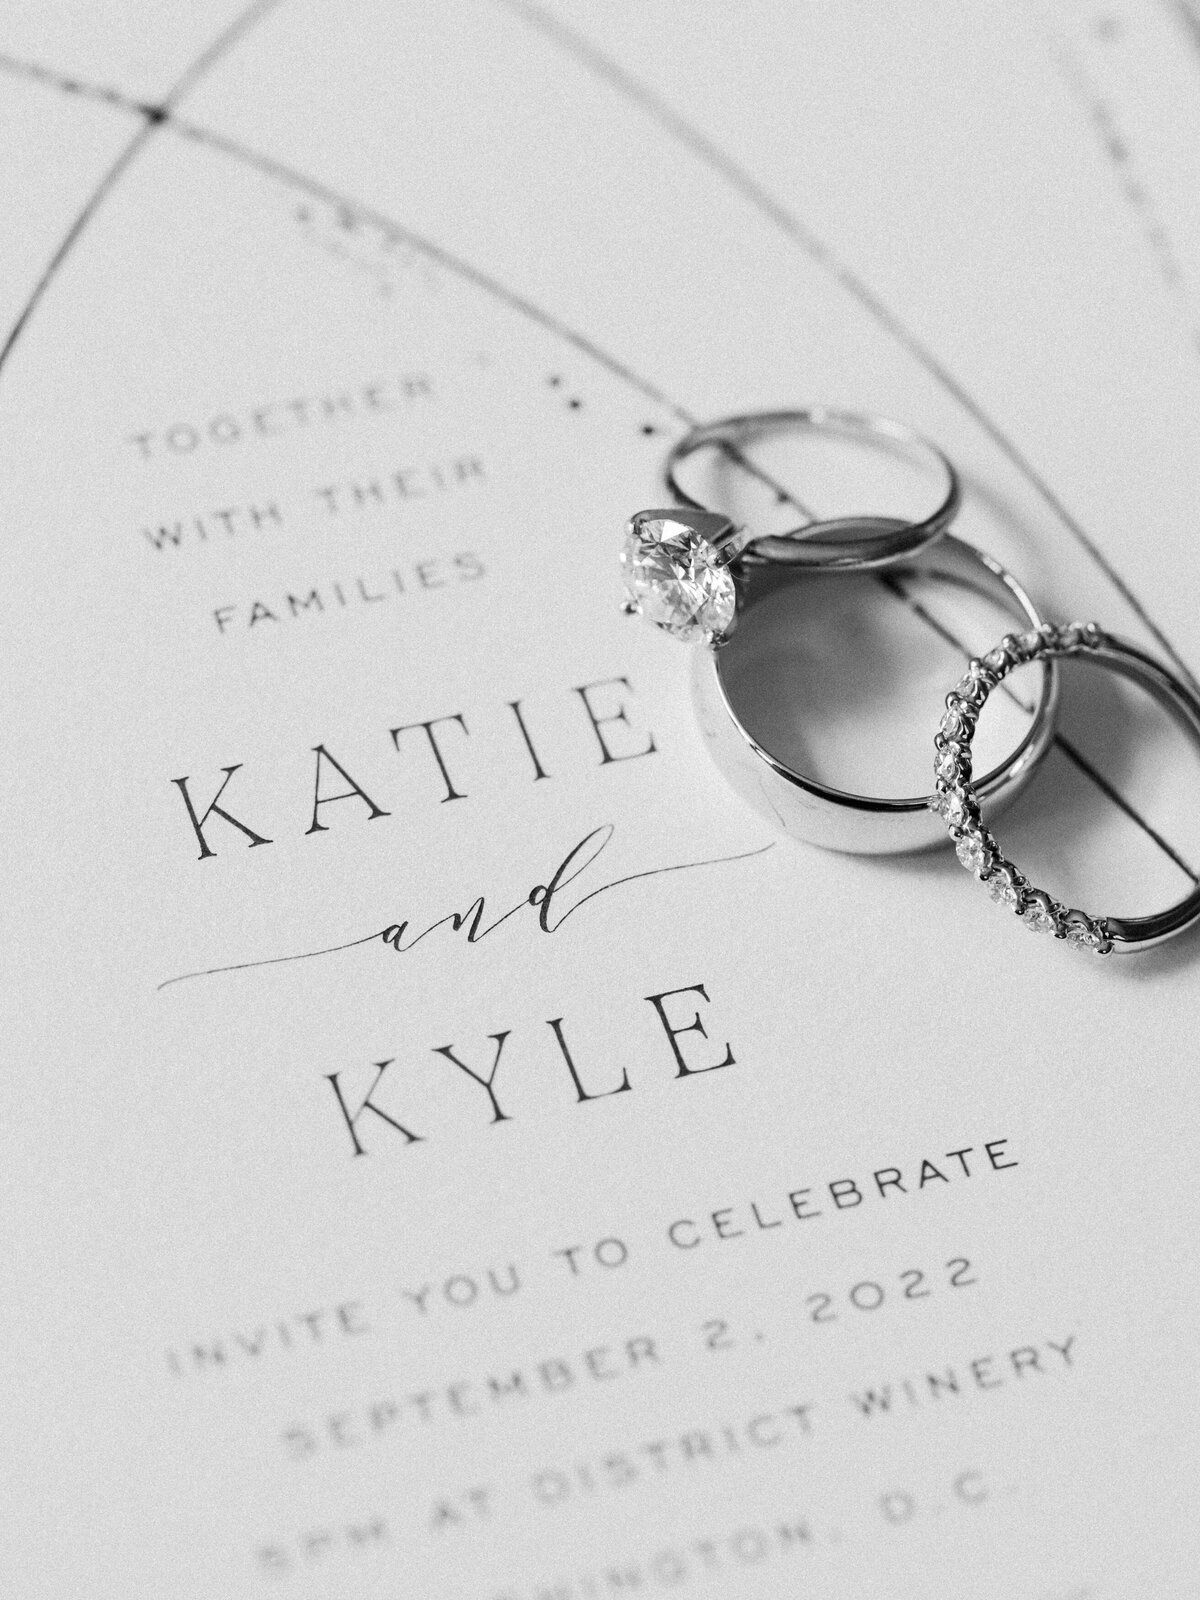 The wedding bands and engagement ring placed on top of a wedding invitation